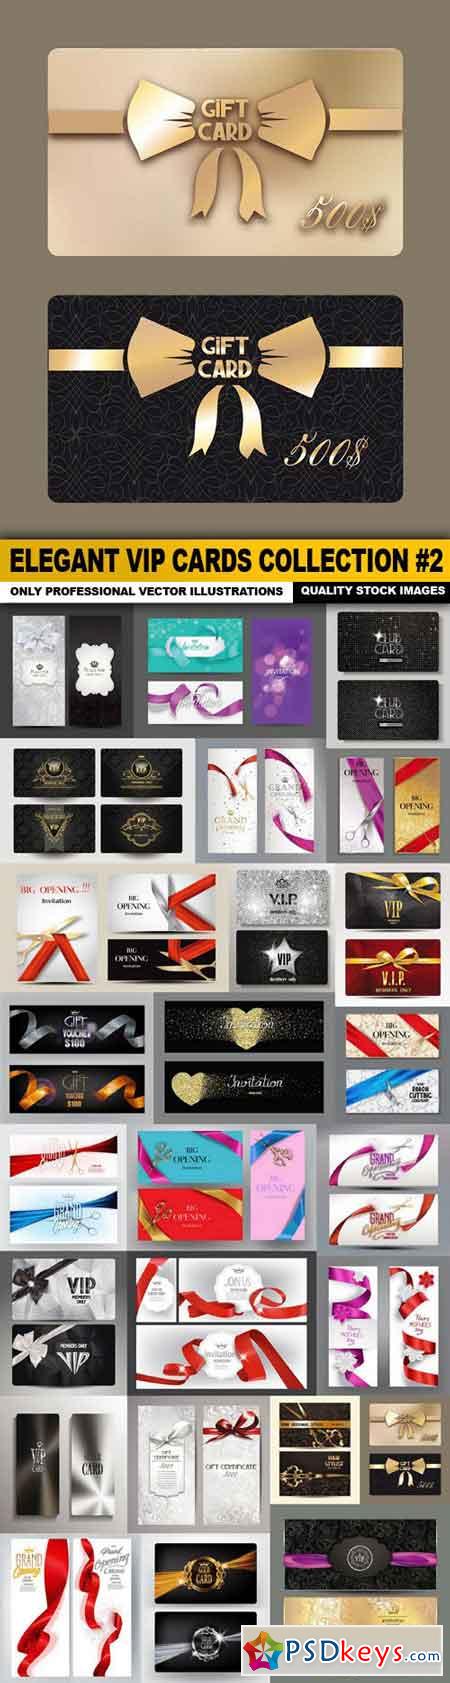 Elegant VIP Cards Collection #2 - 25 Vector